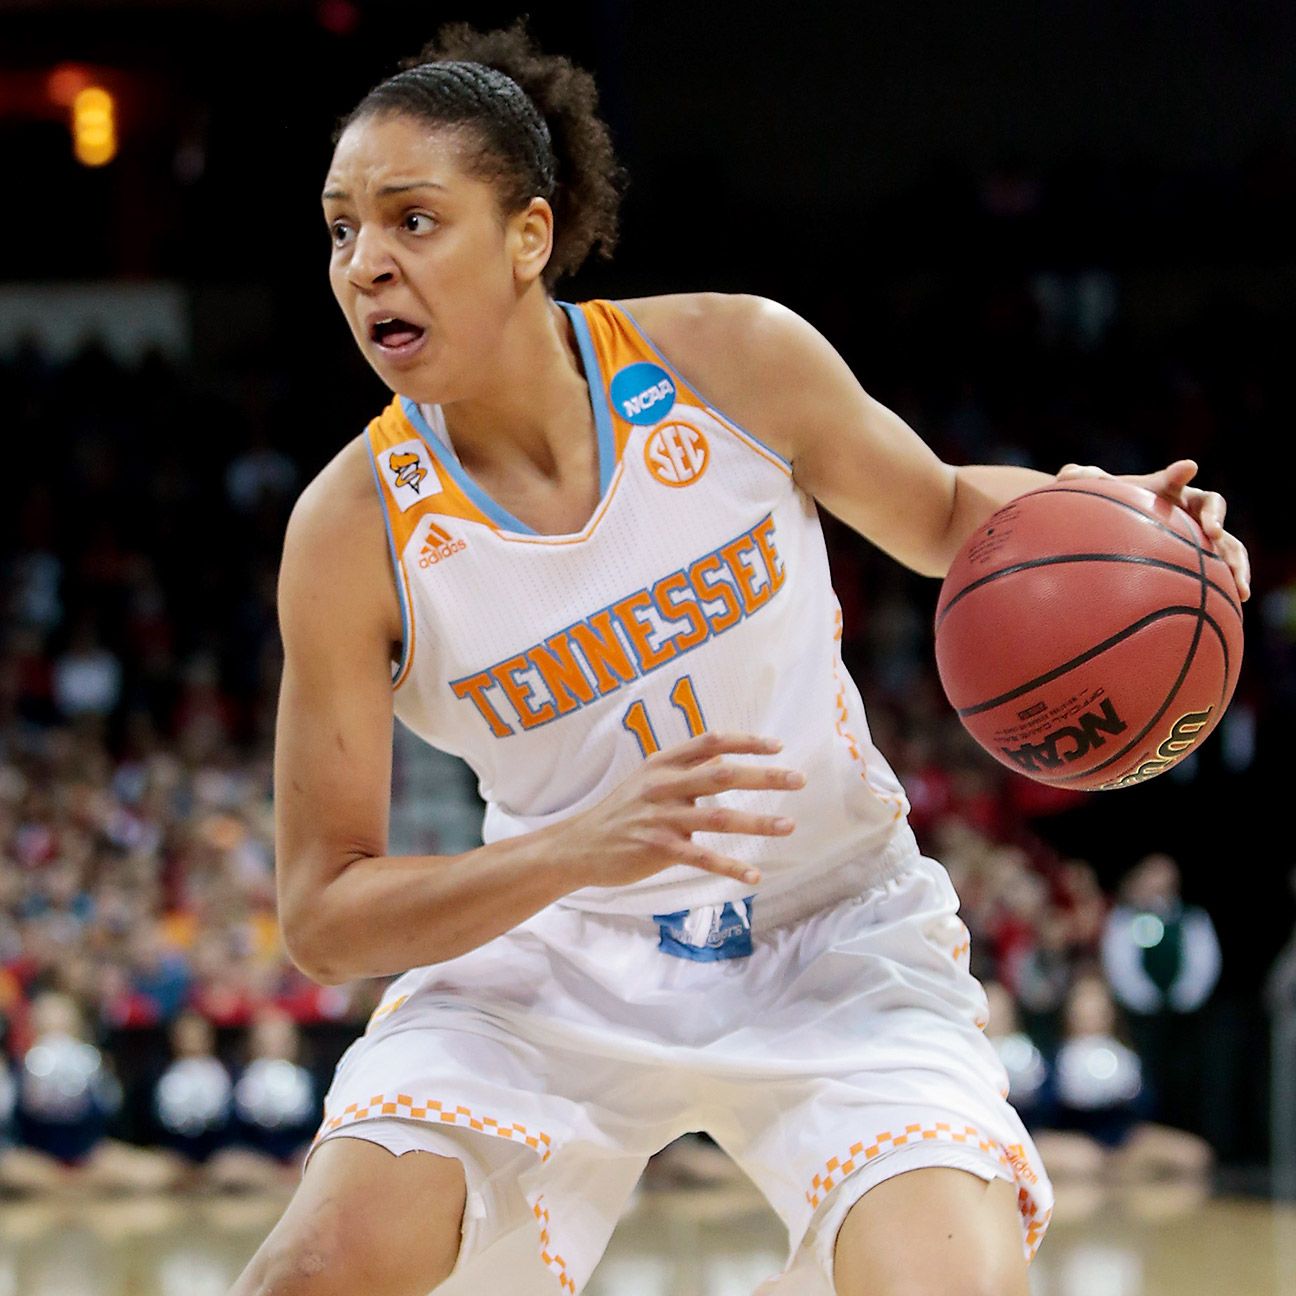 Persistence pays off as Tennessee Lady Volunteers rally in overtime